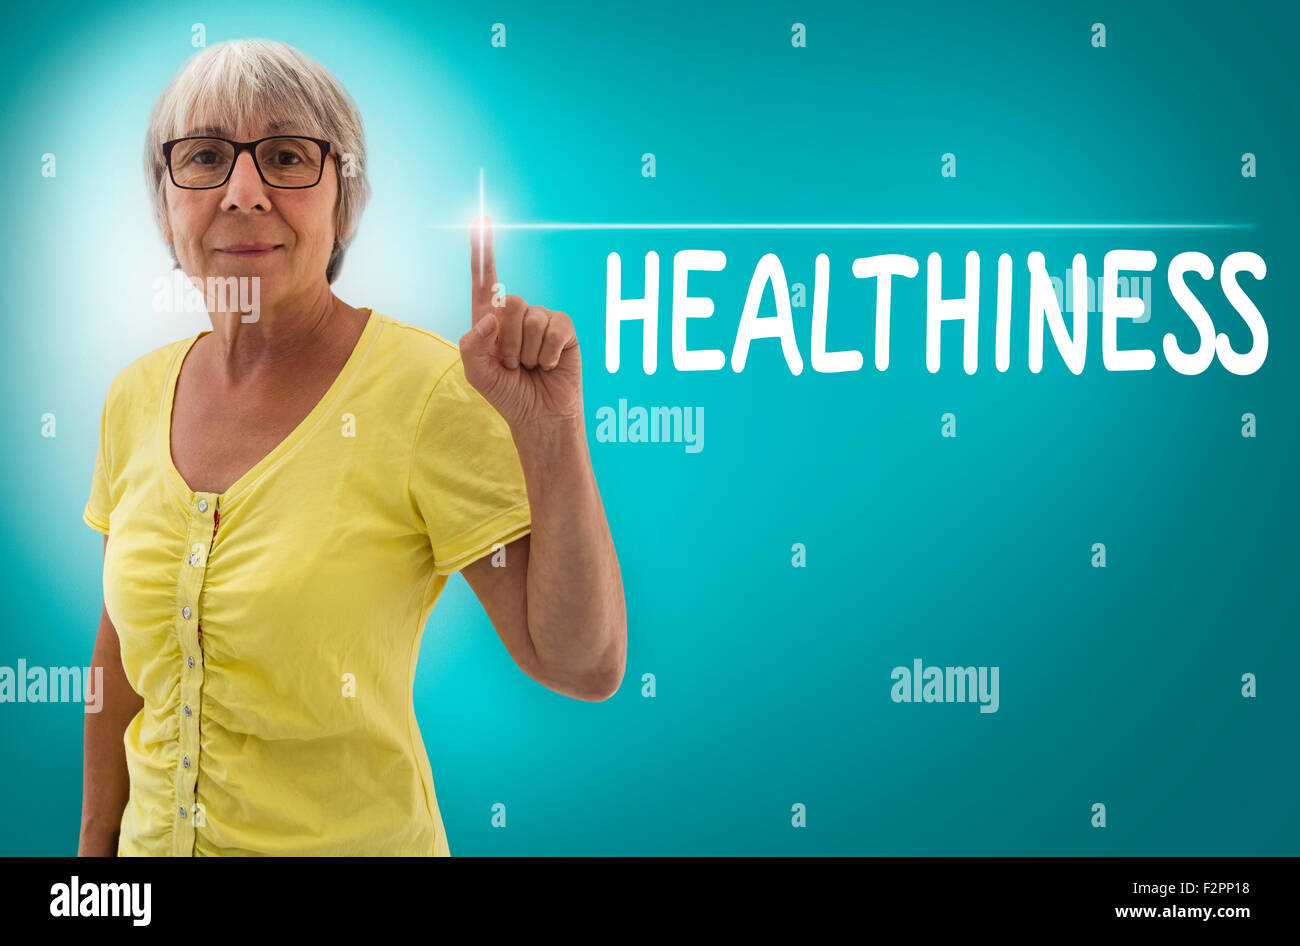 healthiness touchscreen shown by senior concept. Stock Photo